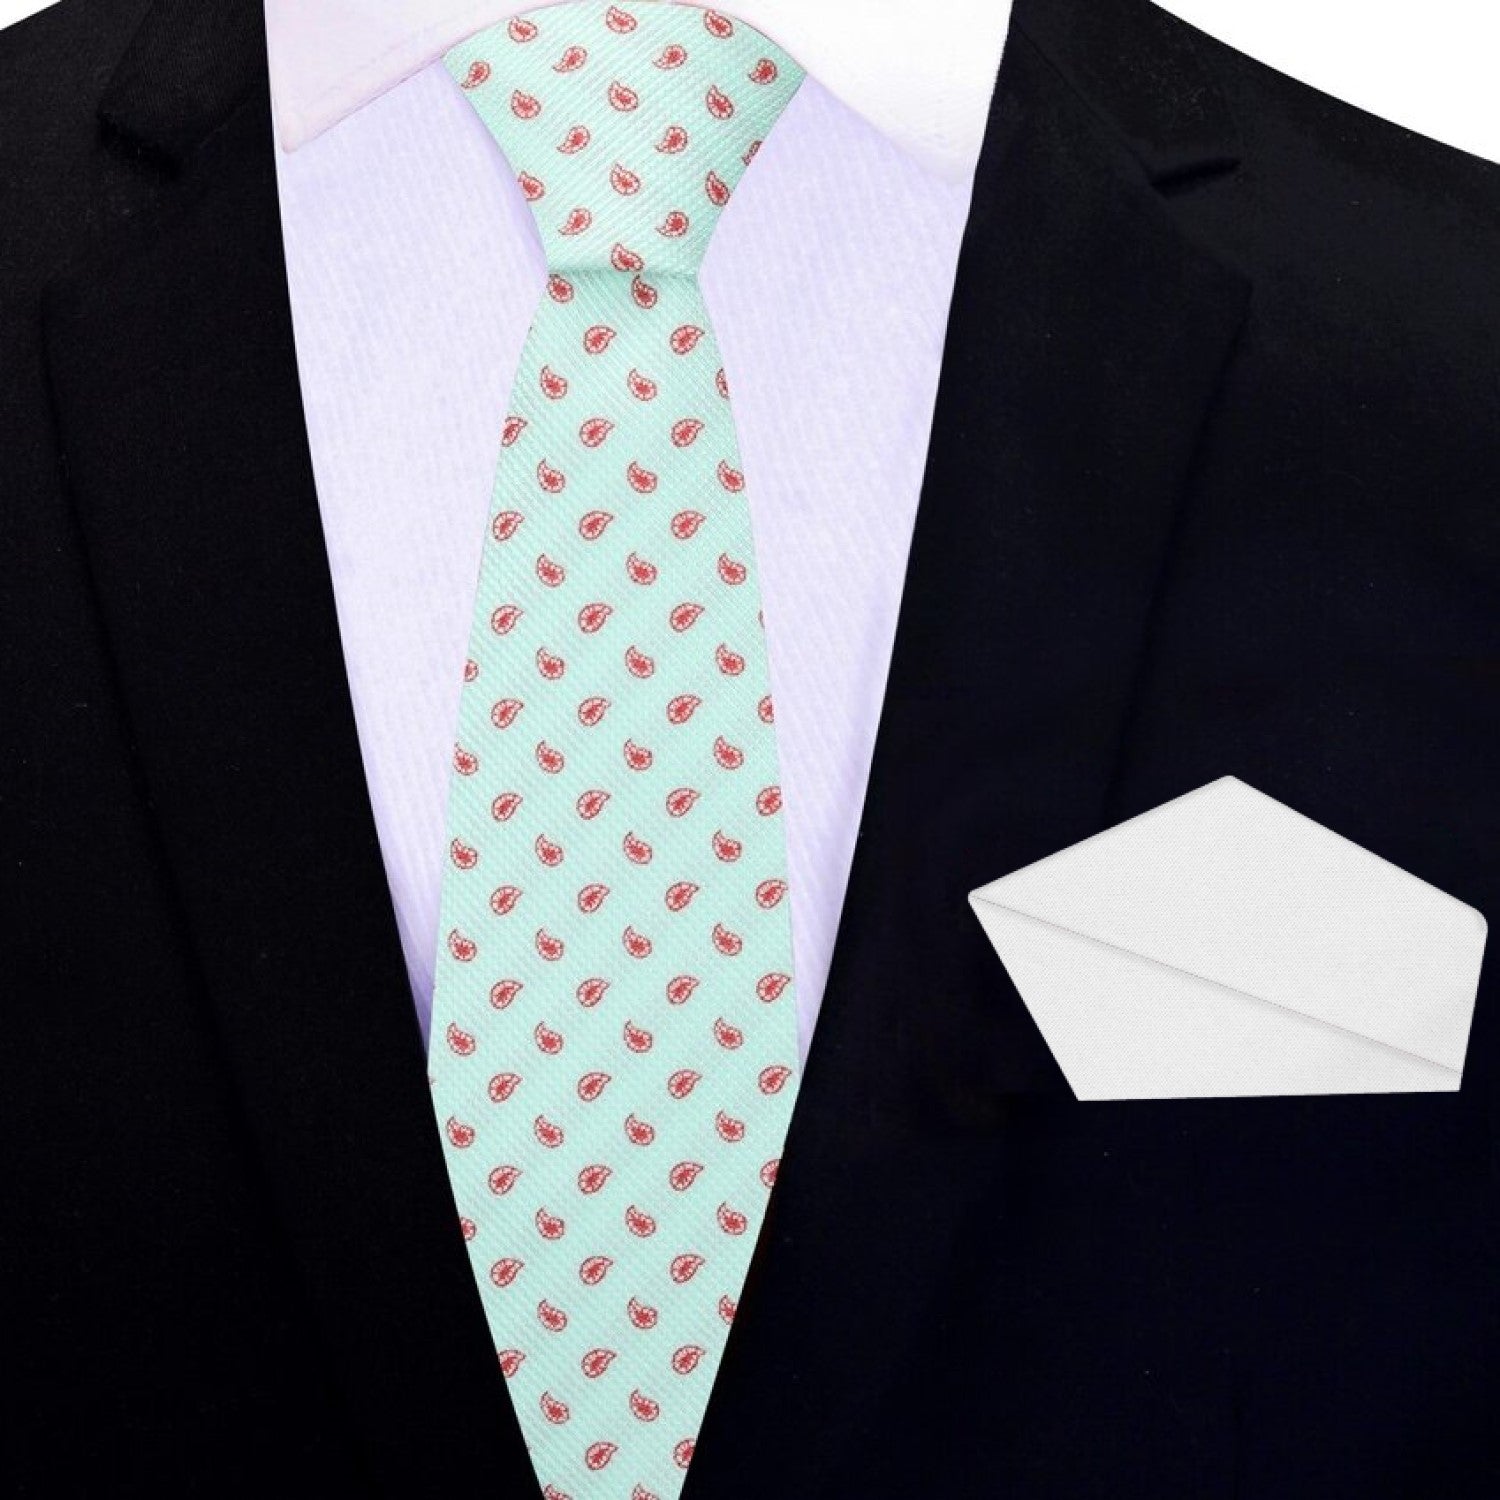 Thin Tie: Light Green, Red Paisley Tie and White Square